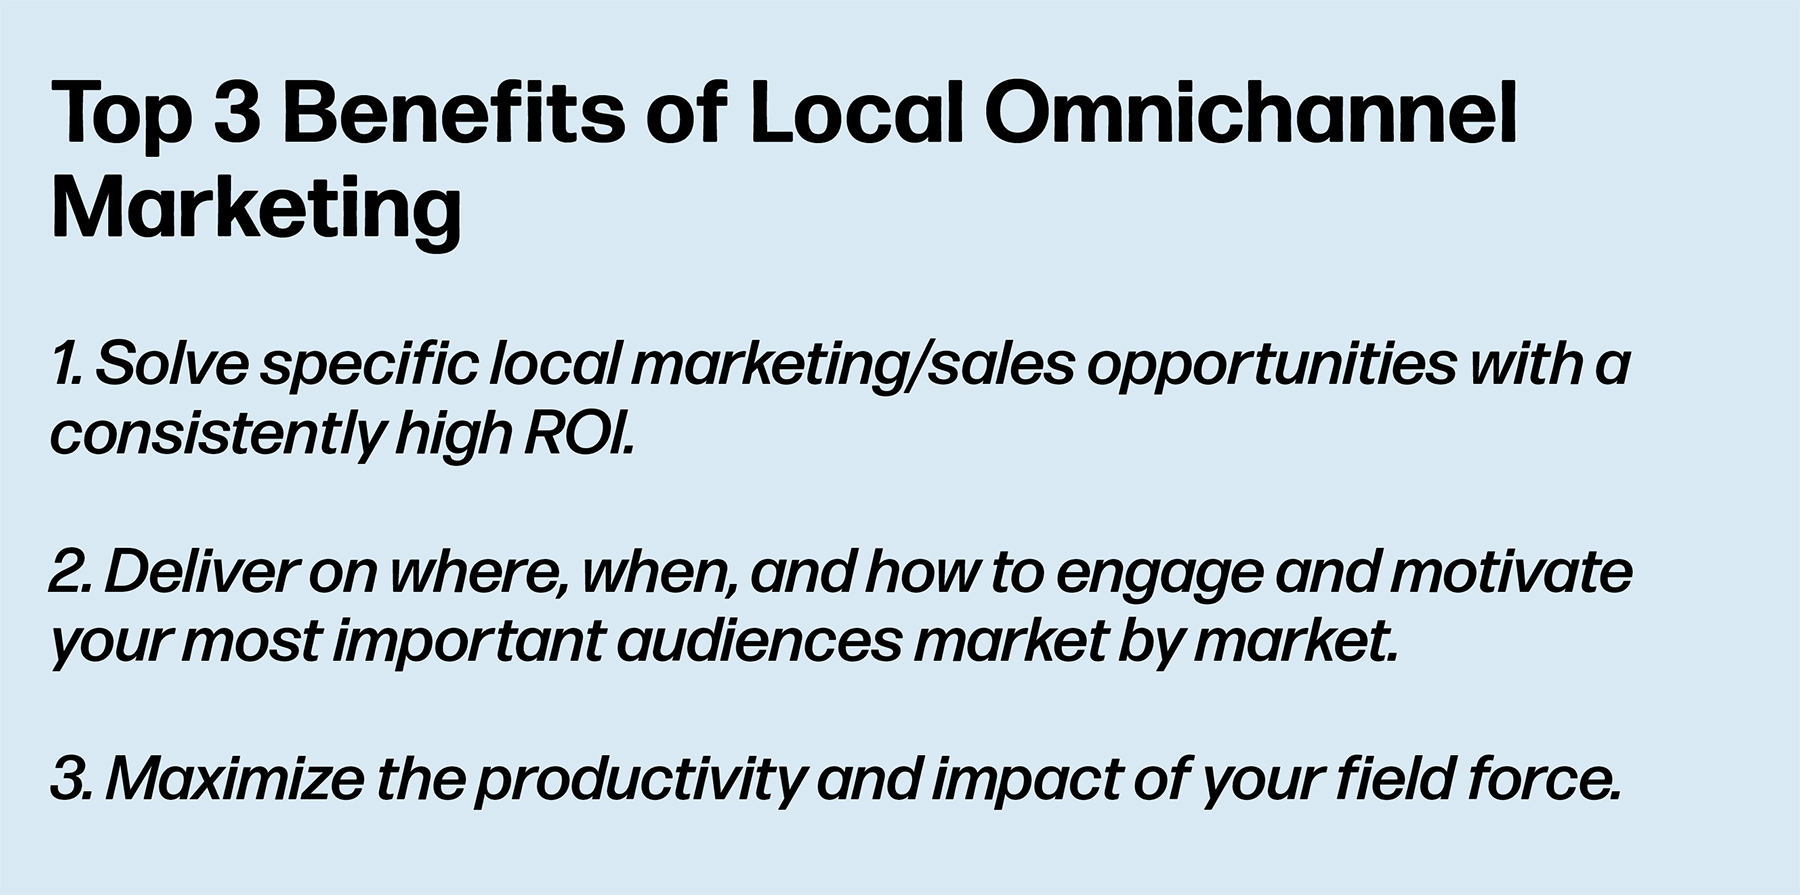 Top 3 Benefits of Local Omnichannel Marketing: 1. Solve specific local marketing/sales opportunities with a consistently high ROI. 2. Deliver on where, when, and how to engage and motivate your most important audiences market by market. 3. Maximize the productivity and impact of your field force.